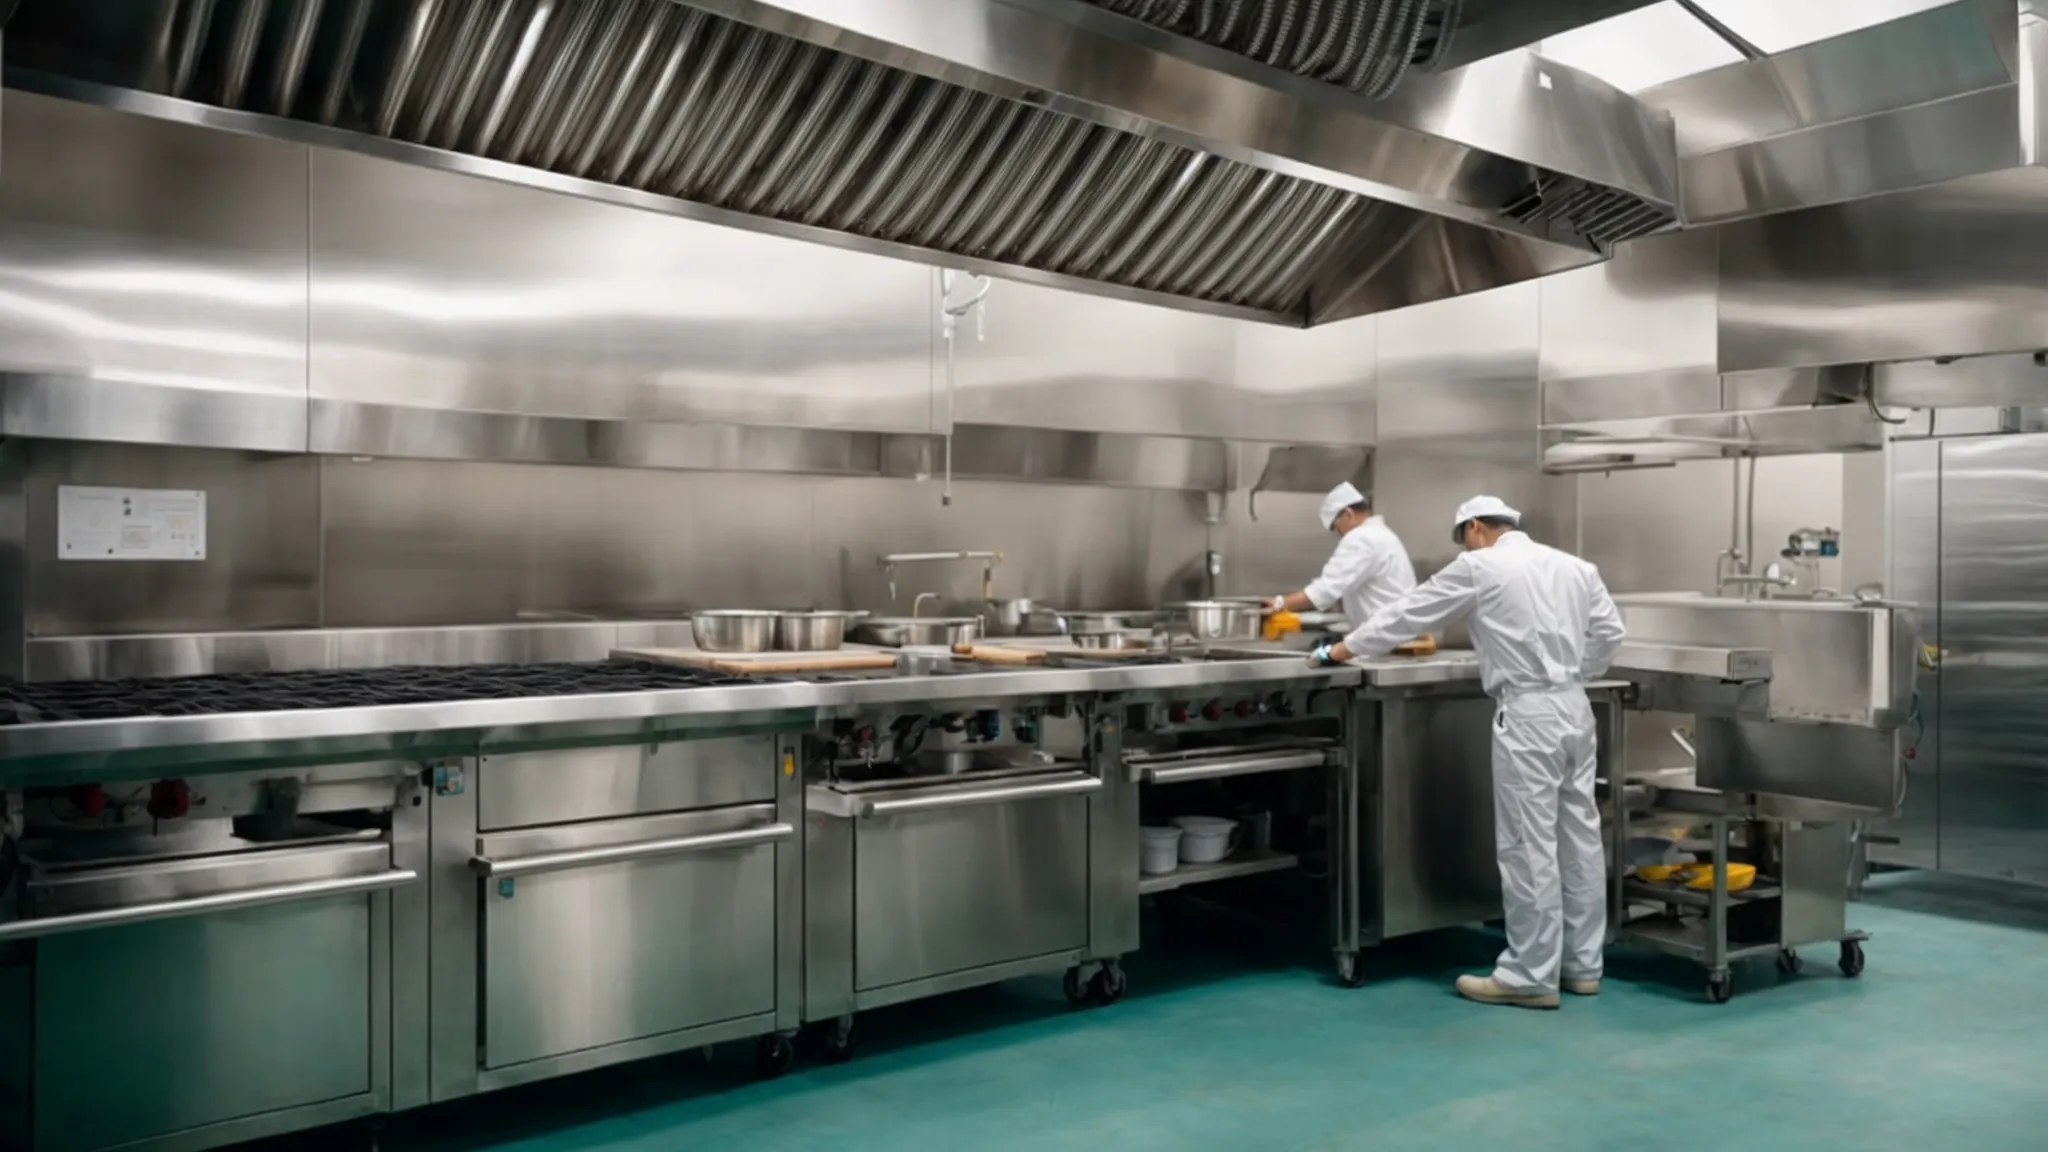 a team of professionals in uniform efficiently cleaning a large commercial kitchen's hood and exhaust system.